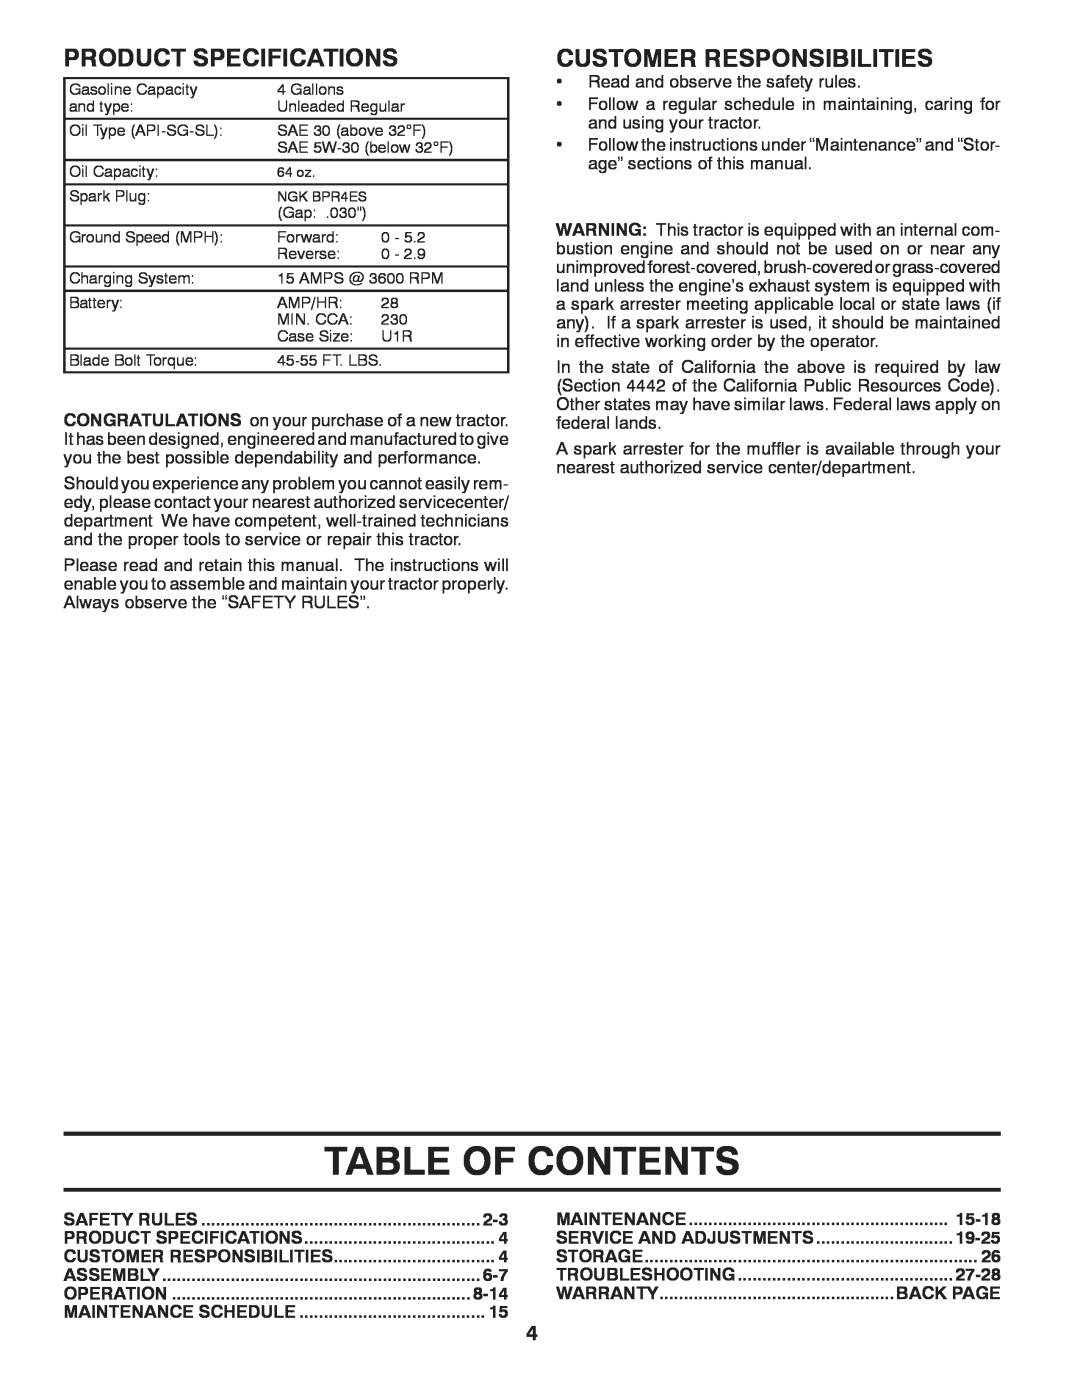 Dixon D26KH54 Table Of Contents, Product Specifications, Customer Responsibilities, 8-14, 15-18, 19-25, 27-28, Back Page 